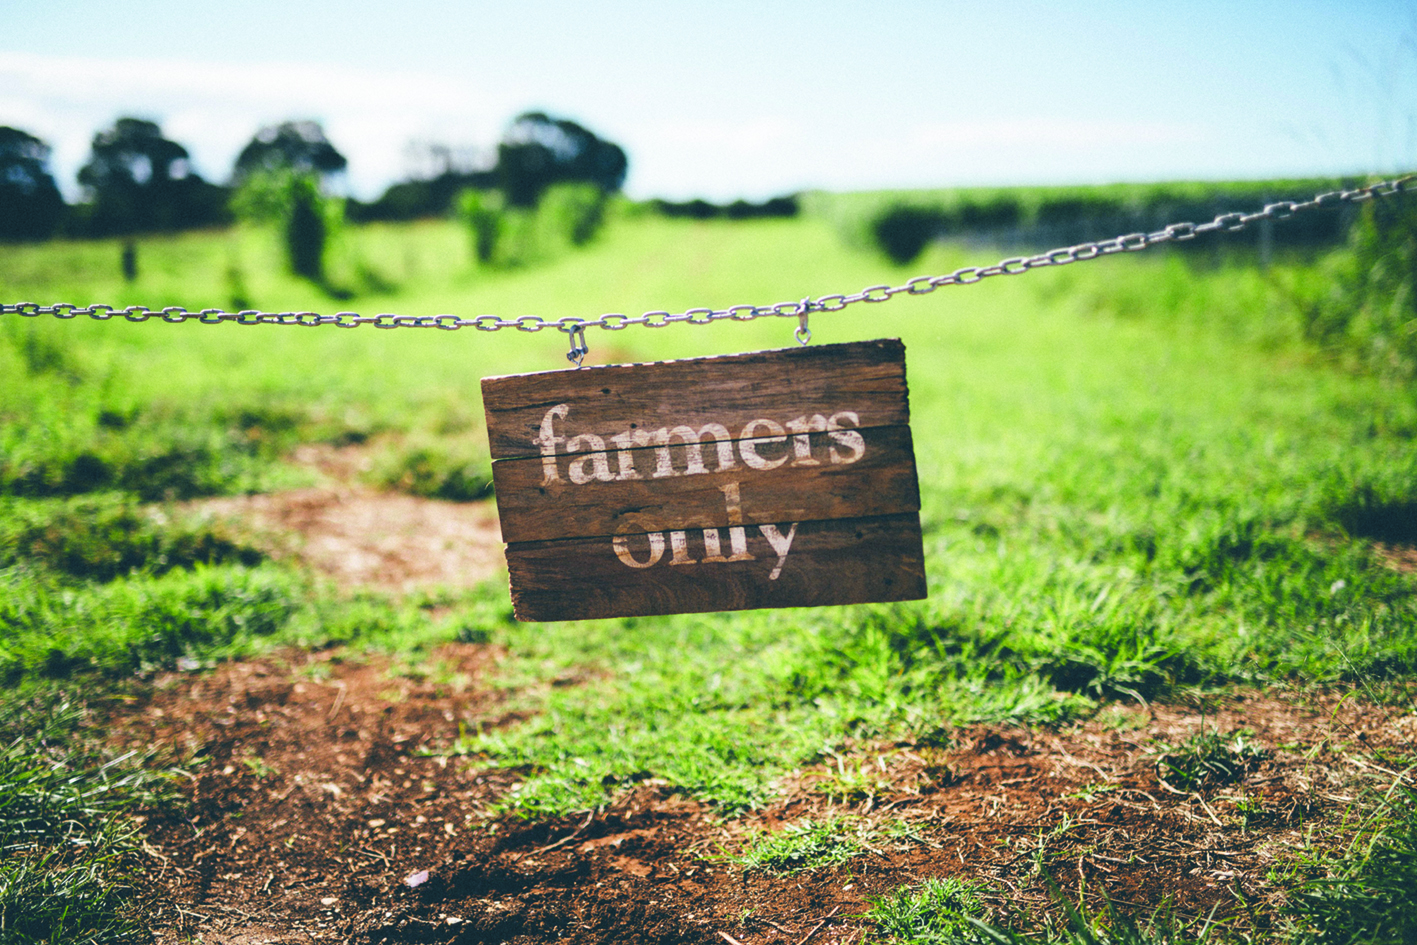 The Farm sub-lets land to other local farmers, providing greater diversity of produce.